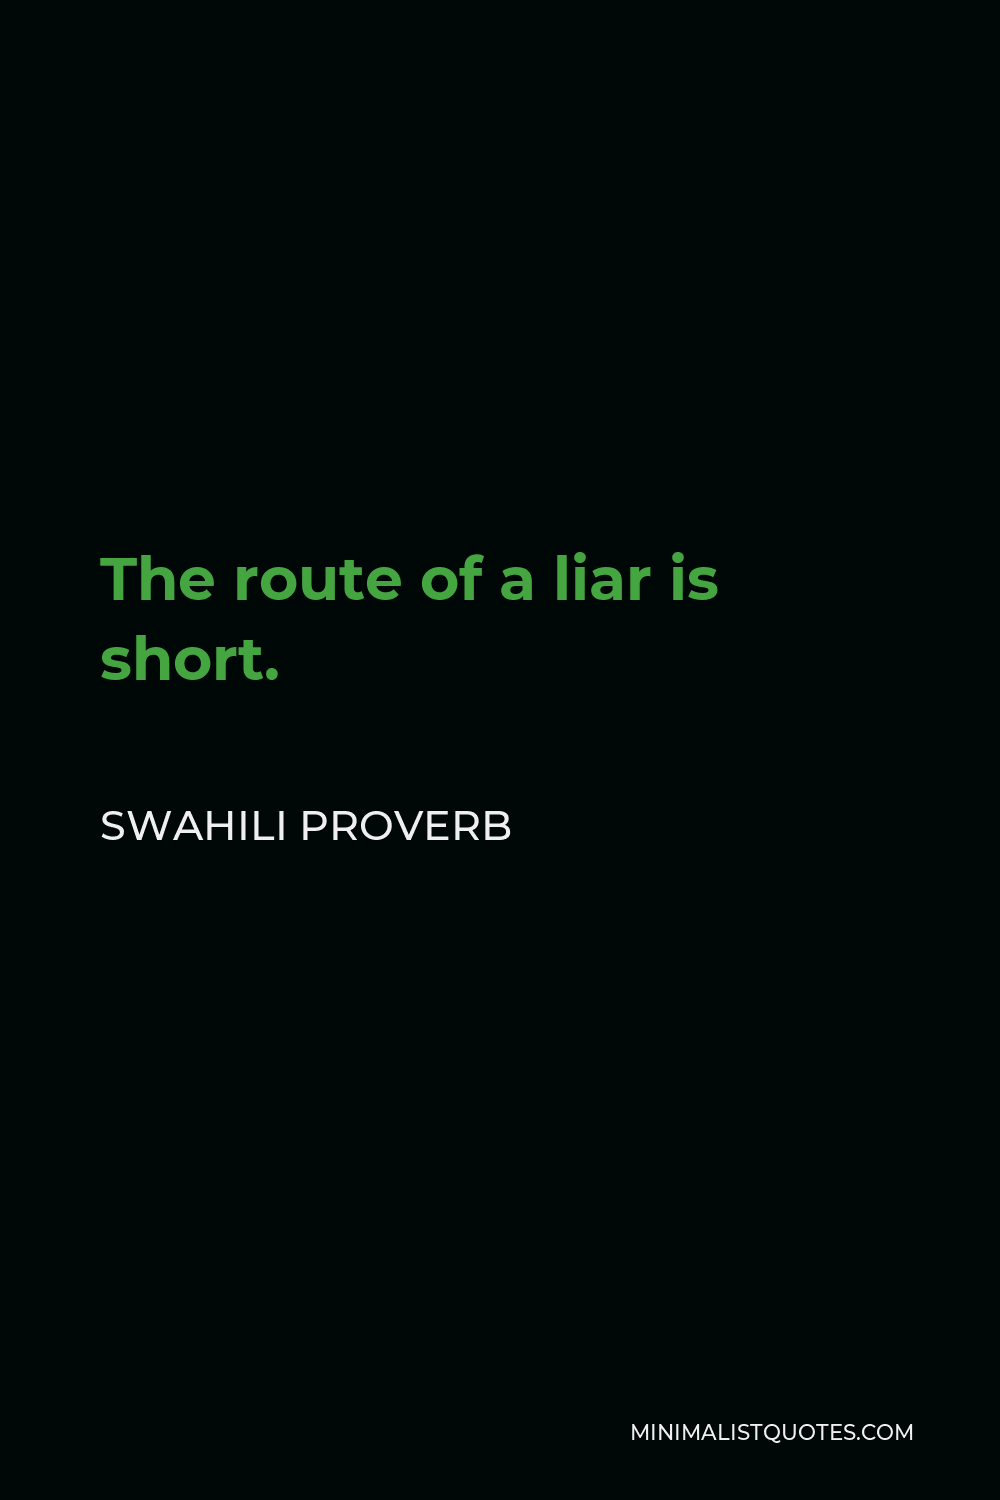 Swahili Proverb Quote - The route of a liar is short.